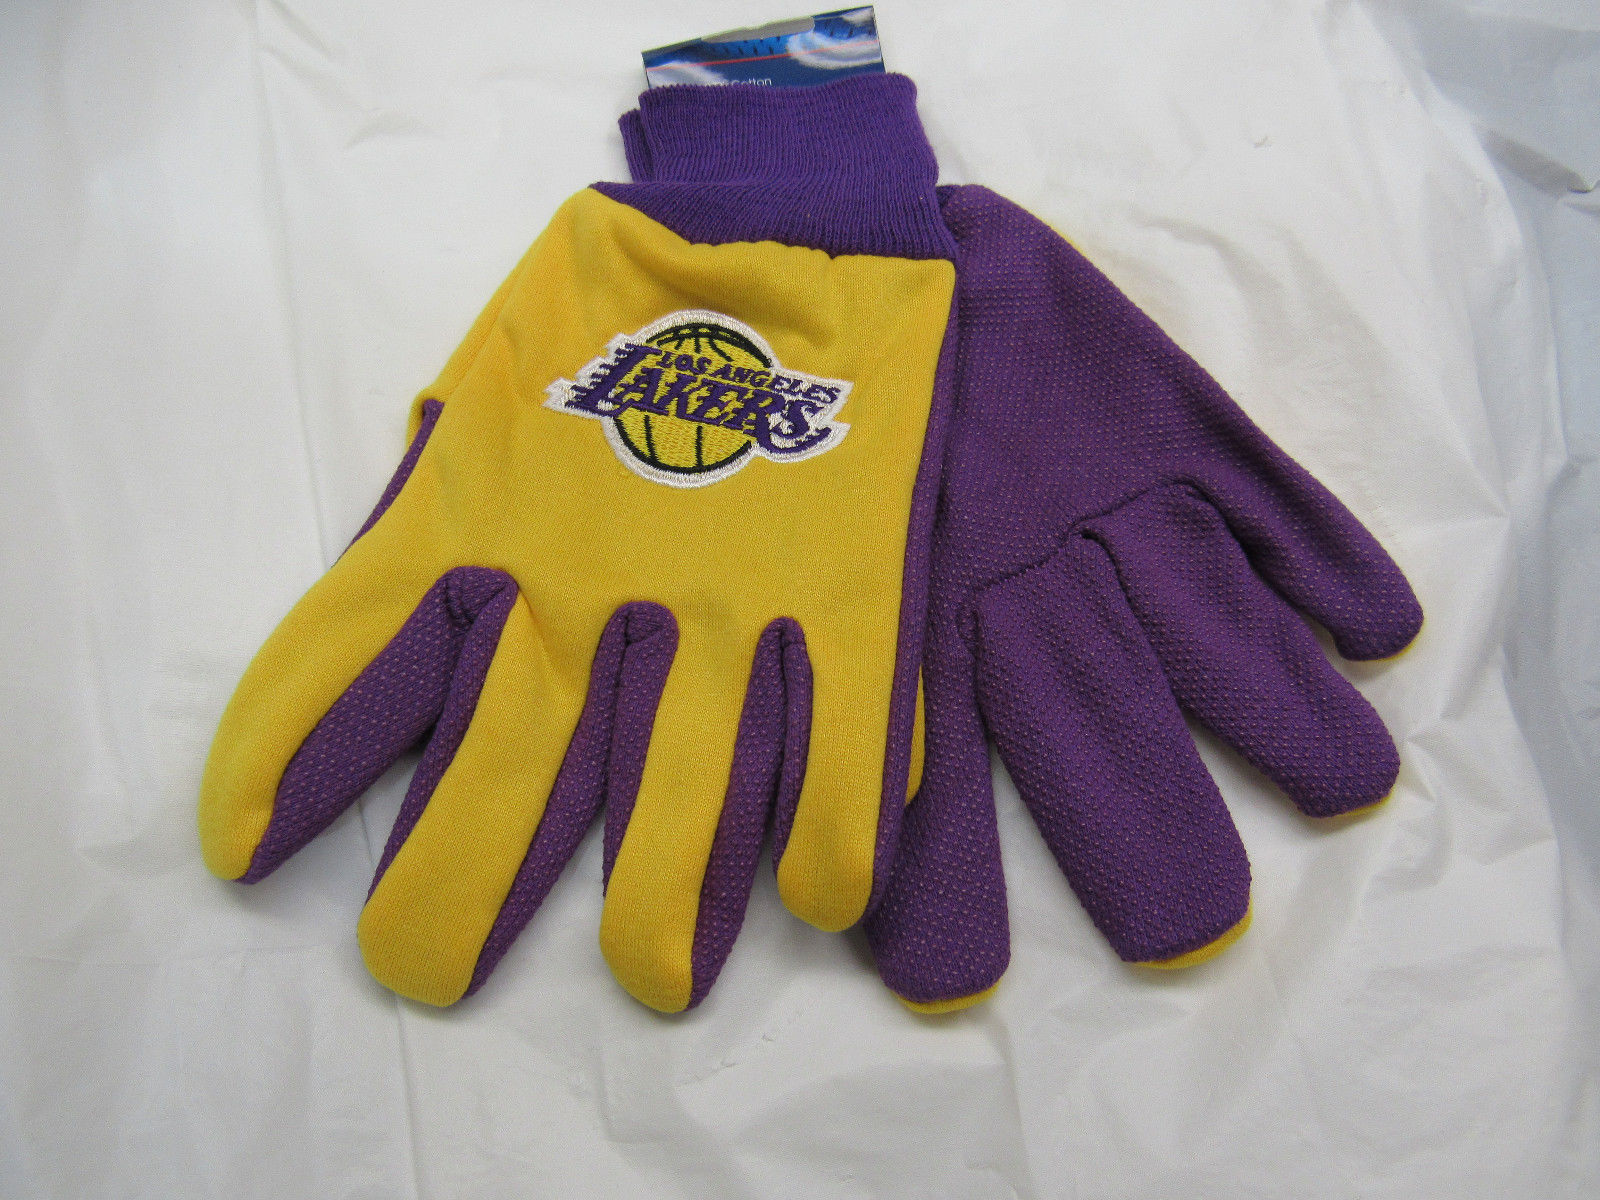 NBA Los Angeles Lakers Colored Palm Utility Gloves Gold w/ Purple Palm McARTHUR - $10.99